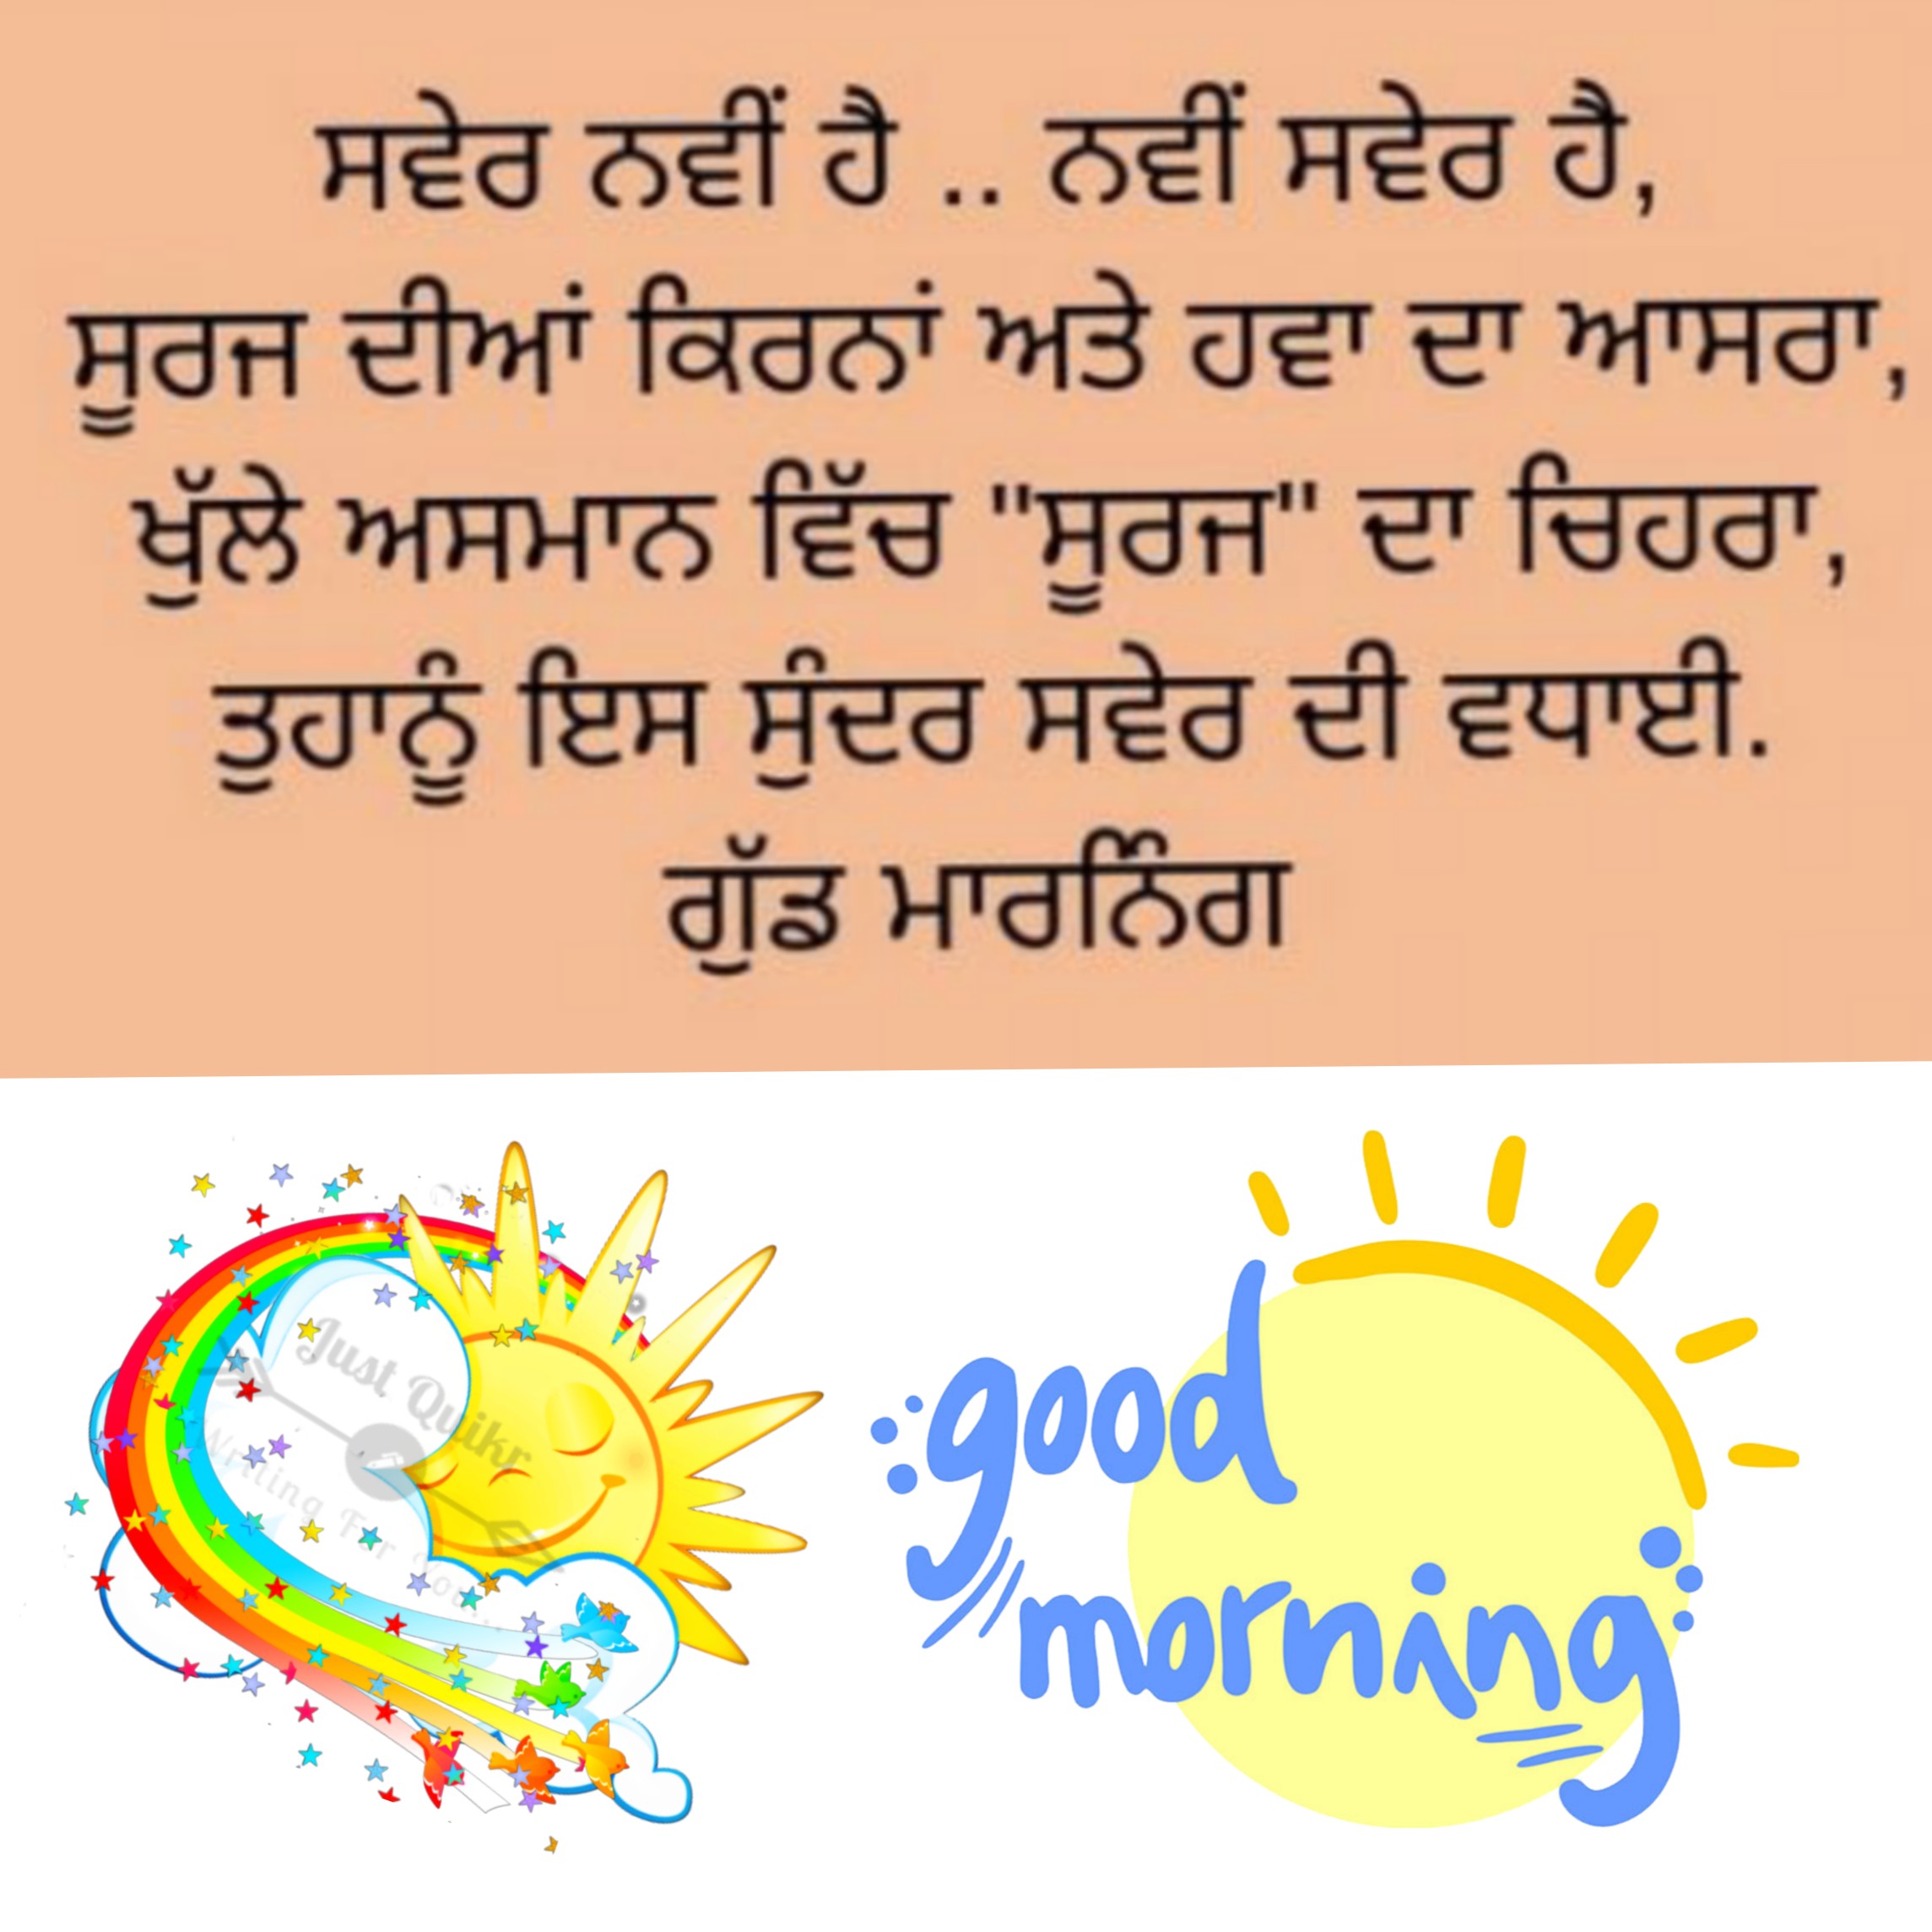 Top 8 : Good Morning Quotes in Punjabi Pics Images Download | Just Quikr  presents birthday wishes, festivals, education